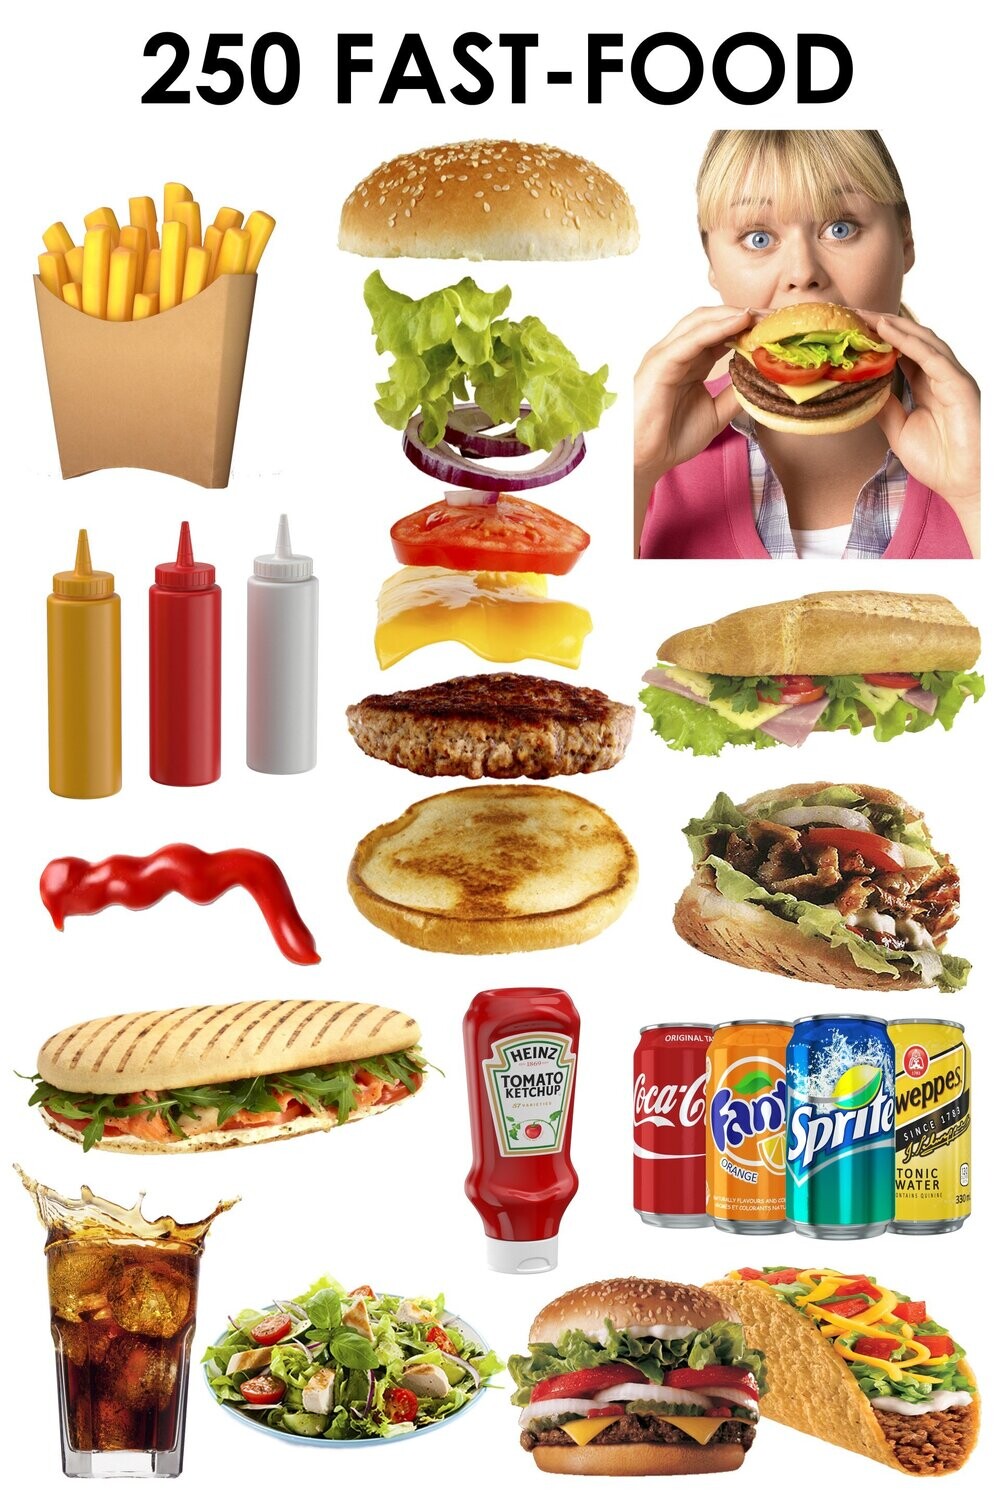 E. PACK FAST-FOOD 250 PNG